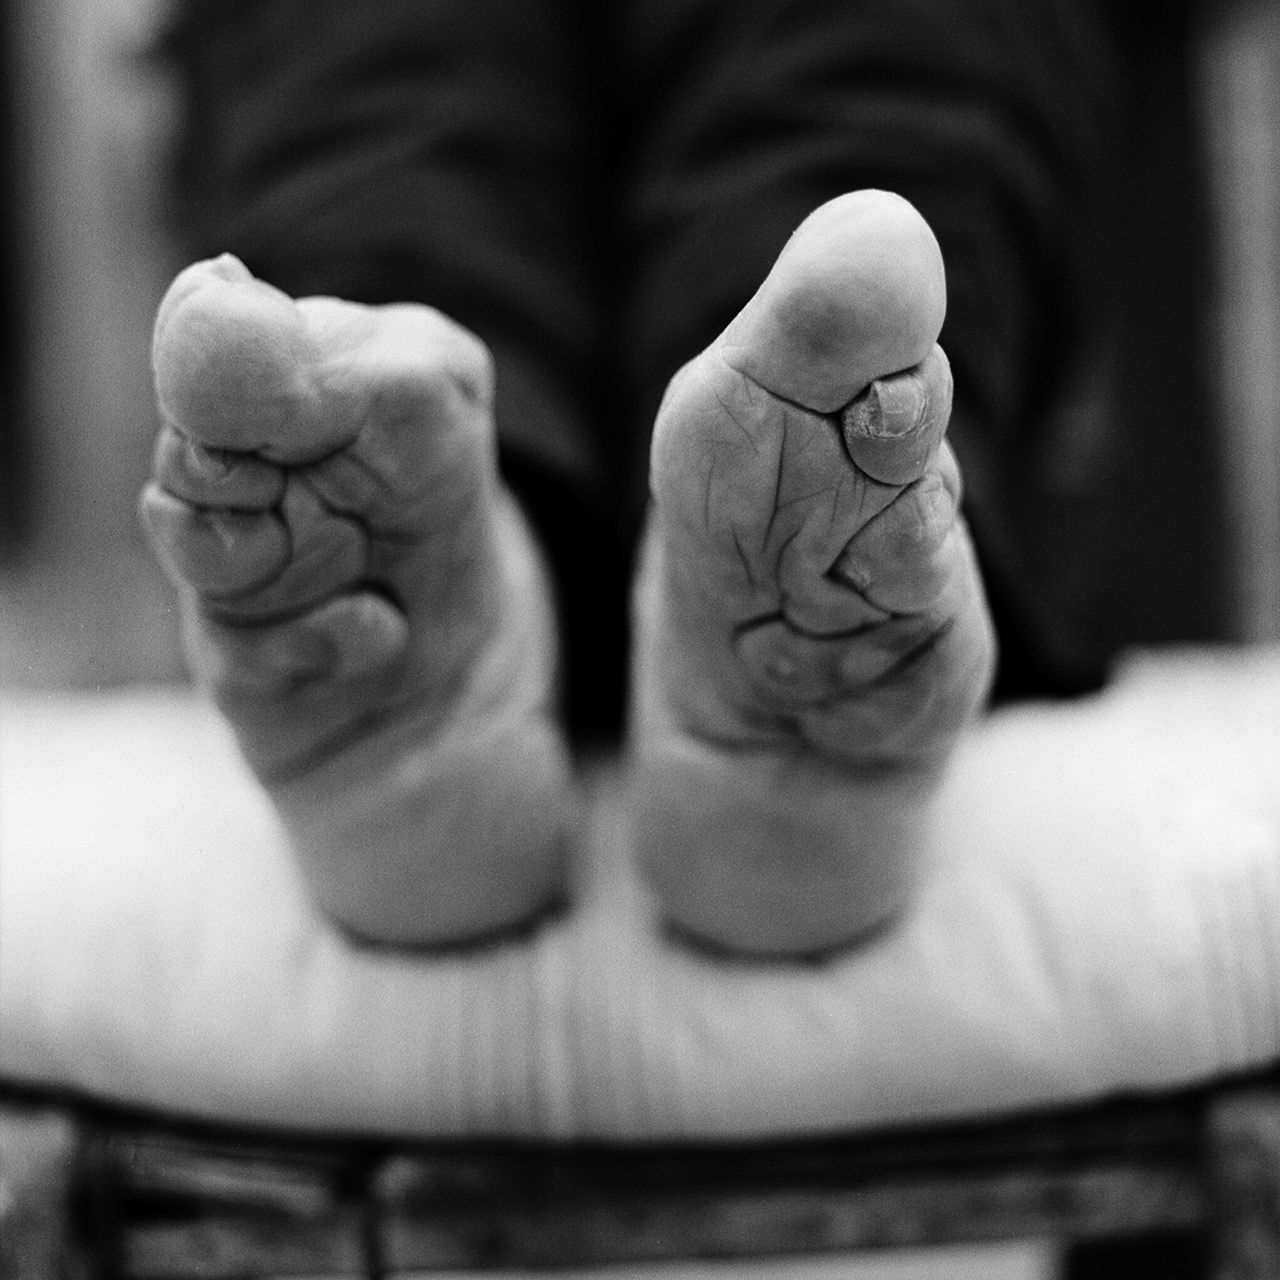 Yang Jinge's feet. "In most cases that I came across in the villages, mothers bound the feet of their daughters, doing it out of love, as they hoped for a better marriage and a better life for their daughters," says Farrell. "About 50% of the feet that I saw were not done very well. A lot of the feet became disfigured and did not achieve the desired shape."